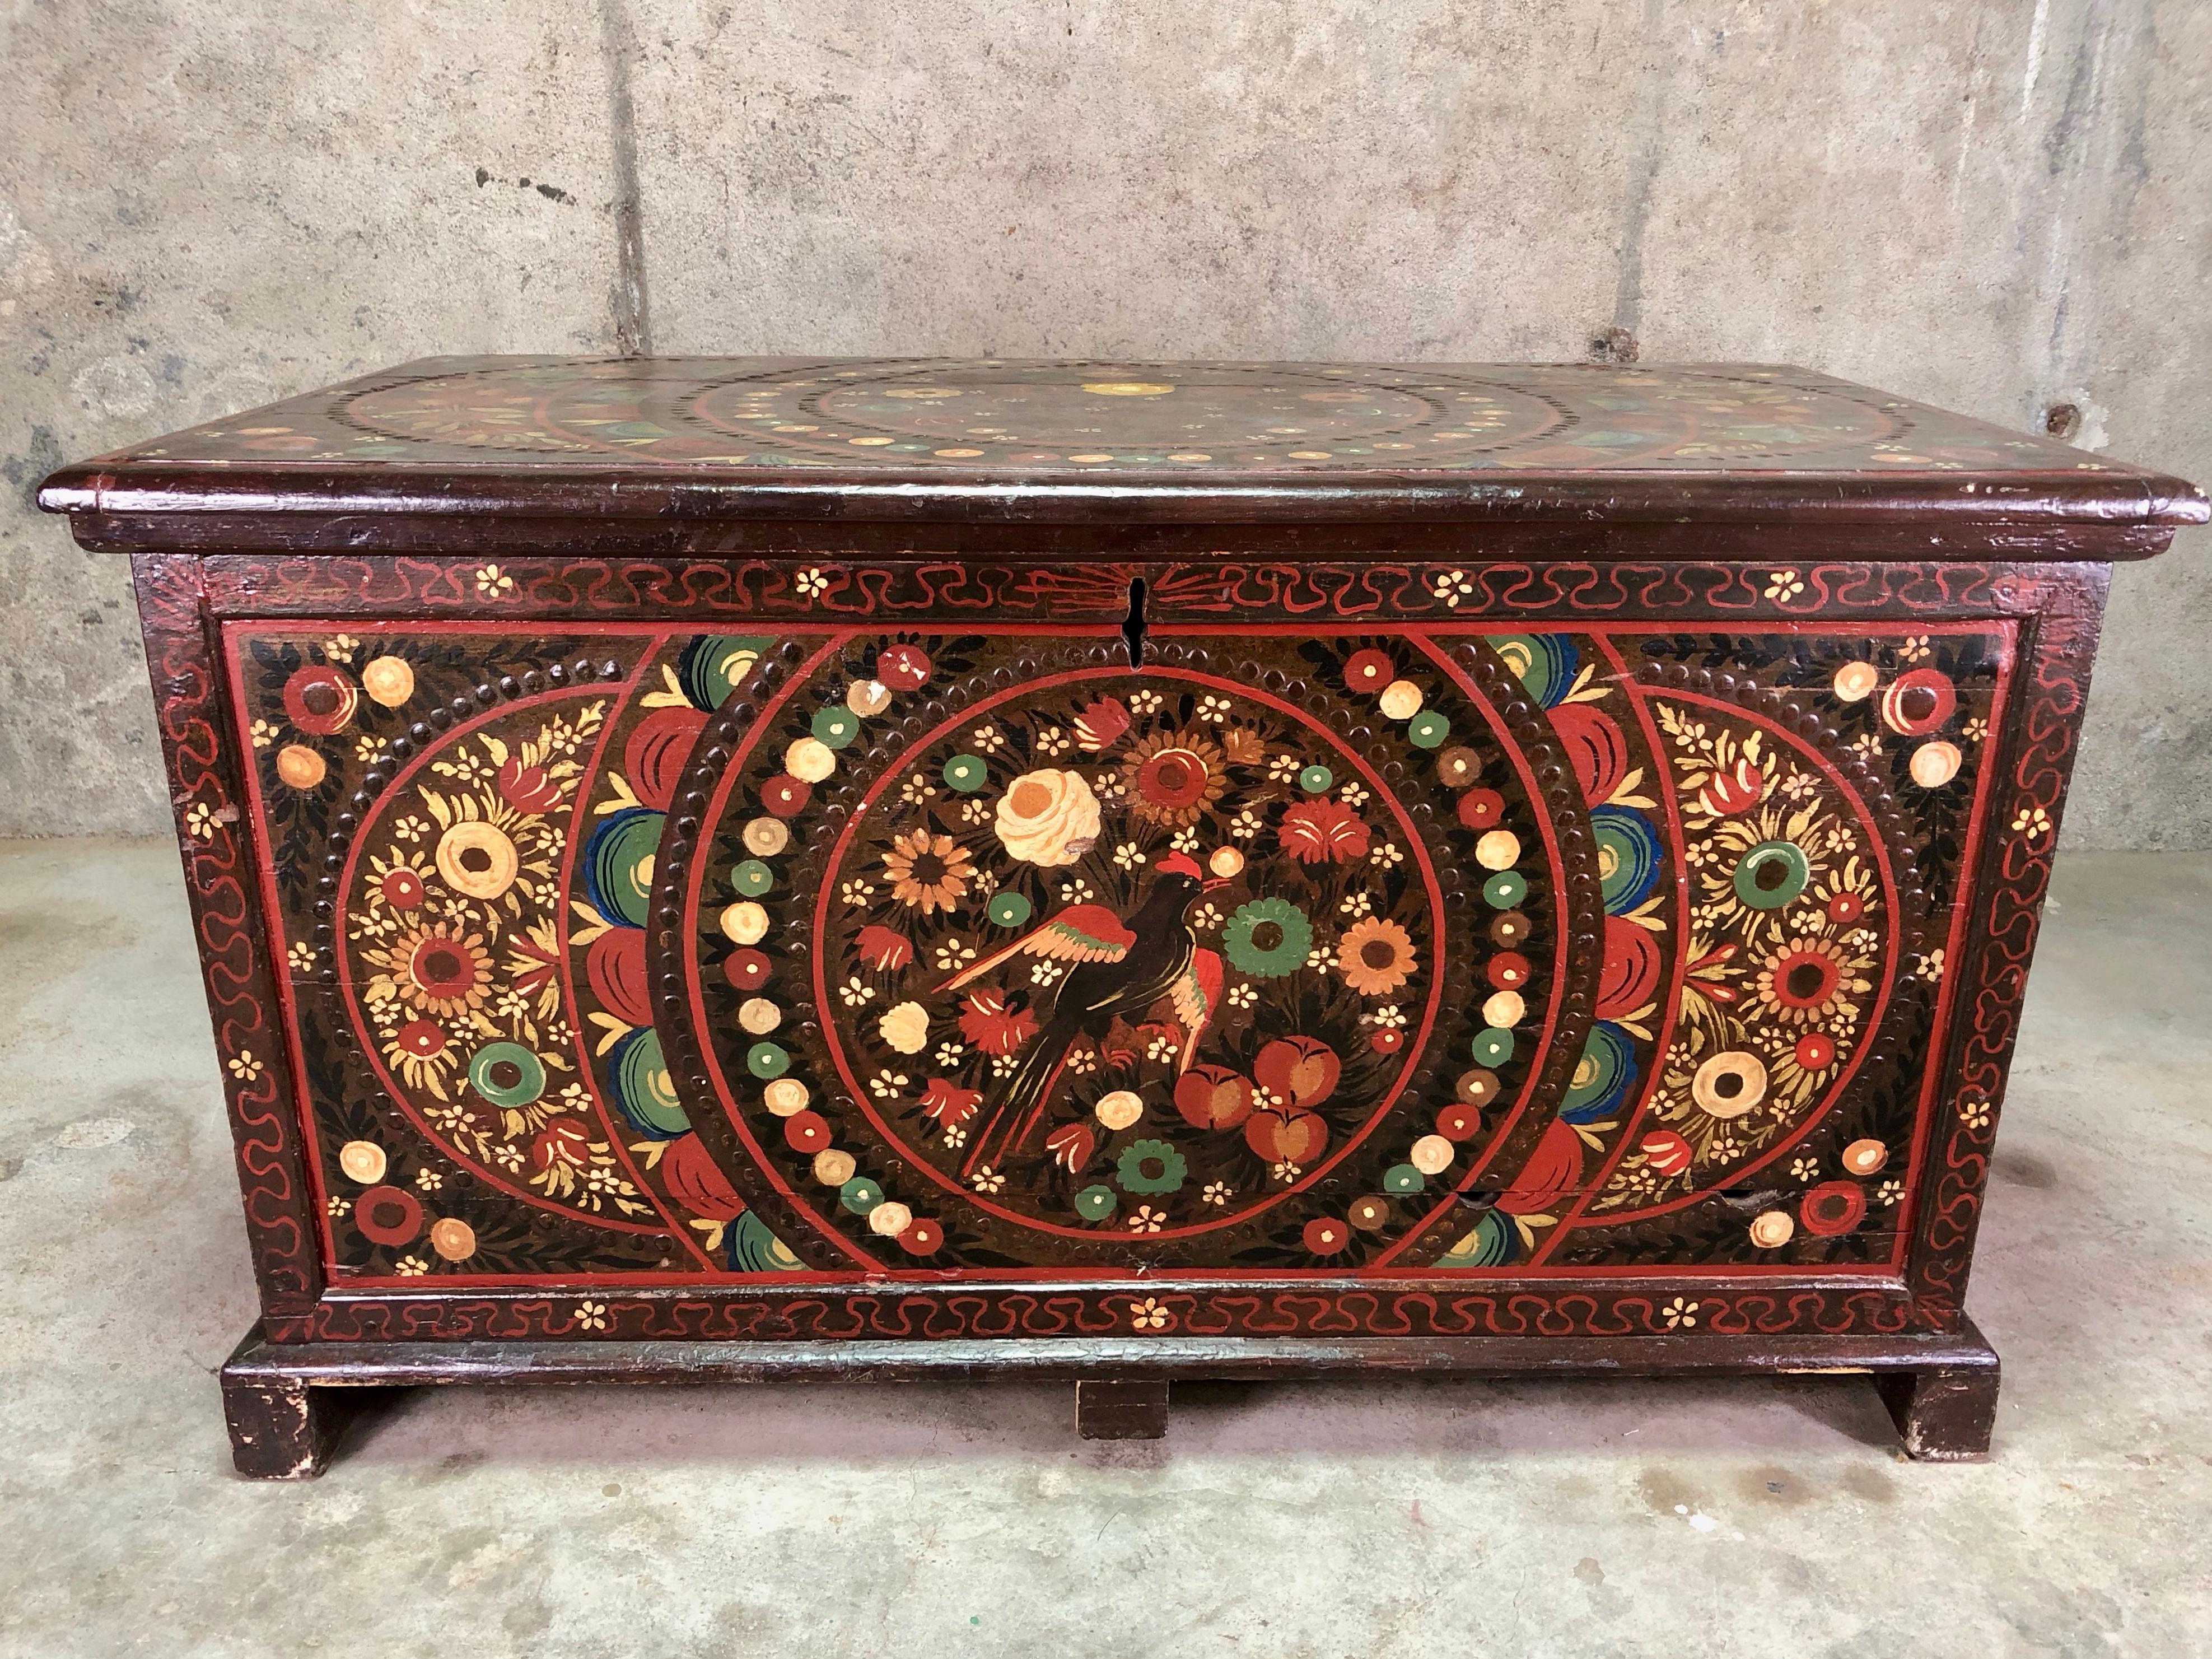 This wonderful French-Alsatian marriage chest, has been hand-painted in a colourful floral design on the top, front and sides, a single bird has been painted into the design on the front of the chest, the back has been left plain.
The top is flat